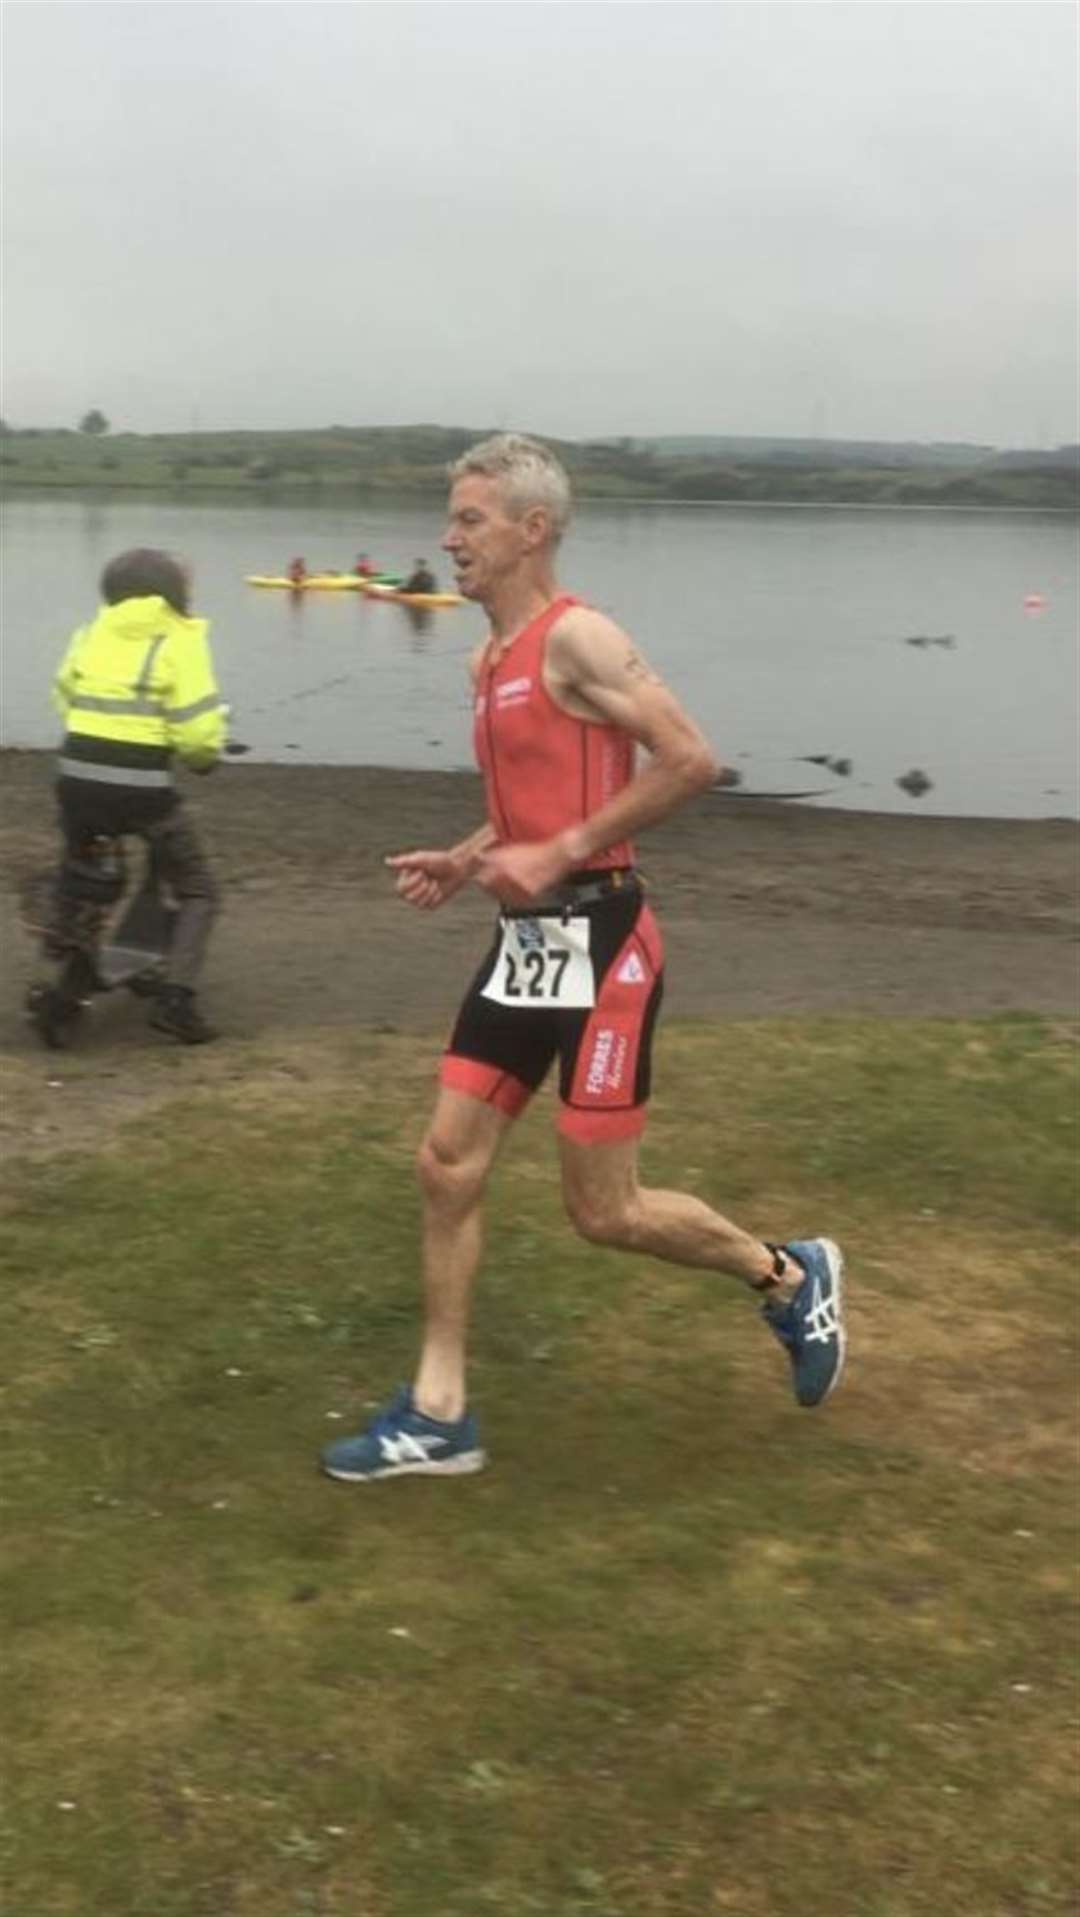 Douglas Cowie on his way to victory in the Scottish triathlon sprint.